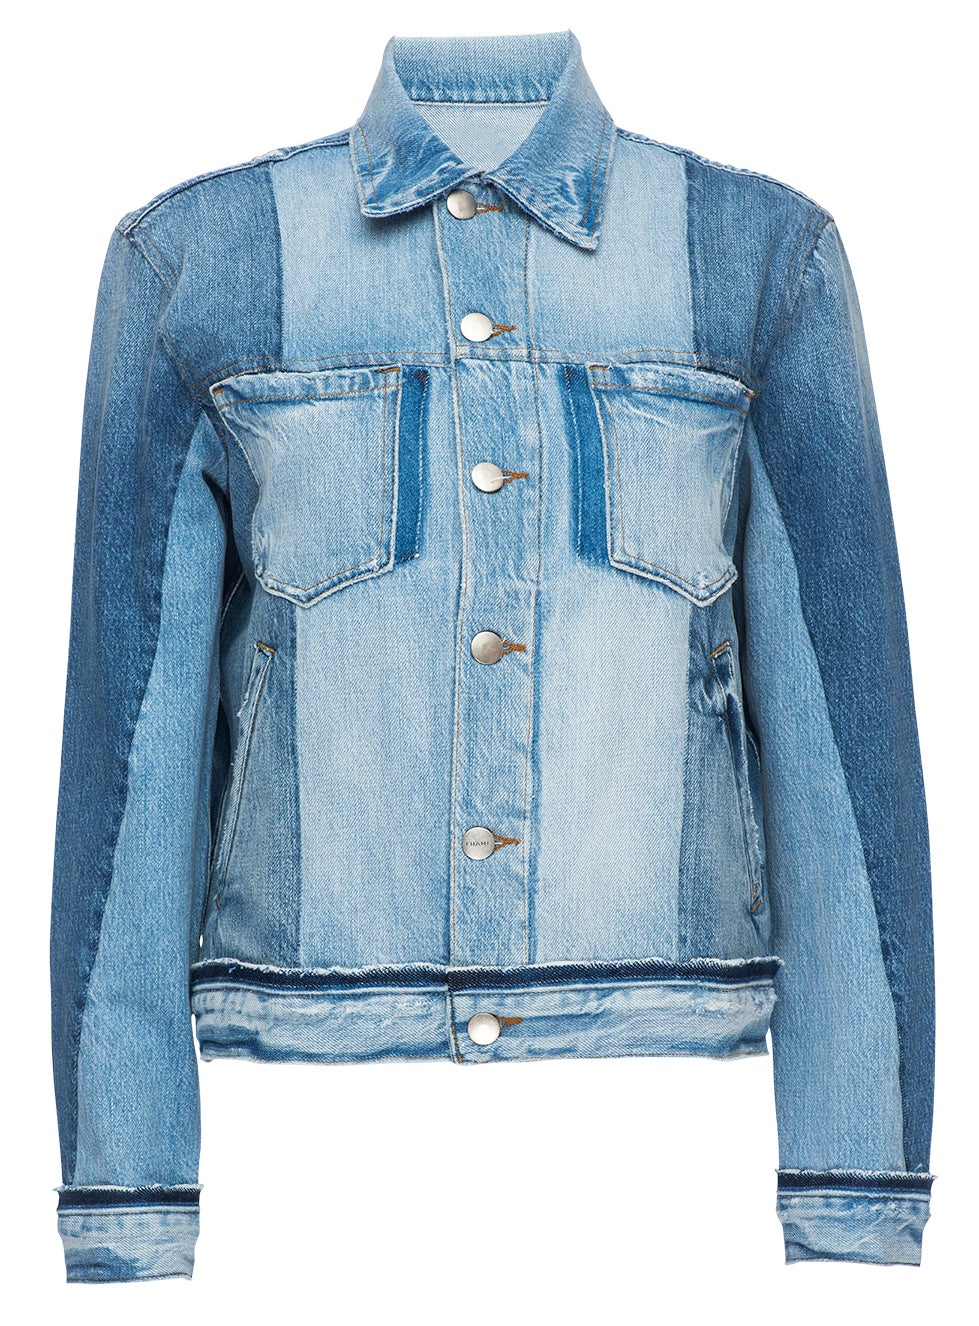 Denim With Personality! 6 Ways to Take Your Jean Jacket to the Next ...